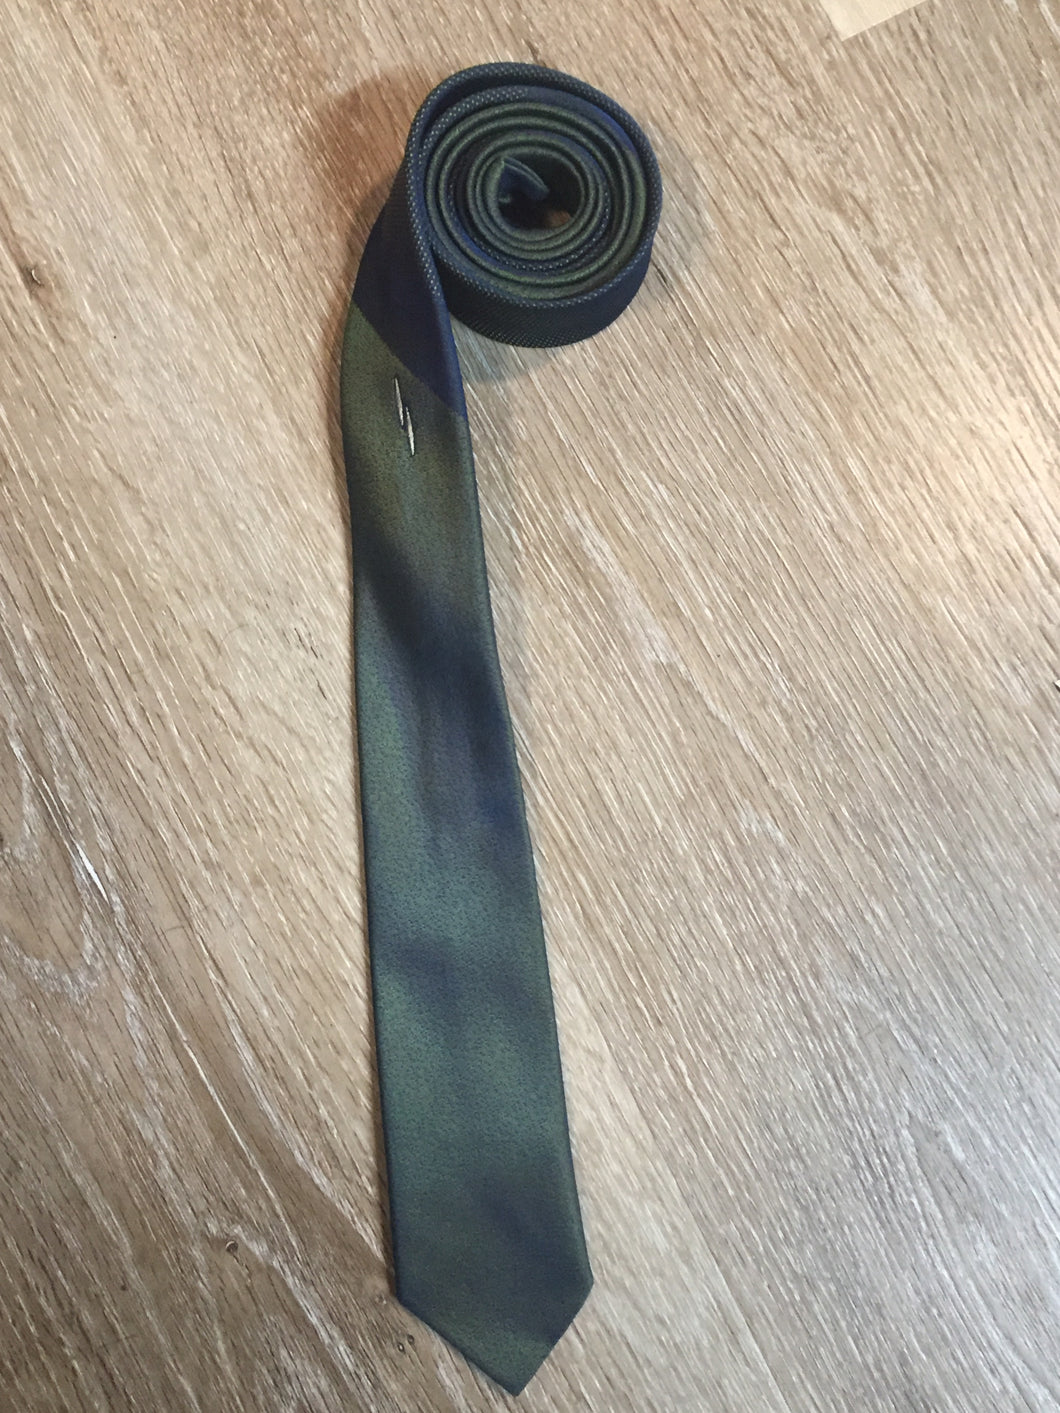 Kingspier Vintage - Vintage green and blue abstract design tie. Fibres unknown.

Length: 53.5” 
Width: 2” 

This tie is in excellent condition.